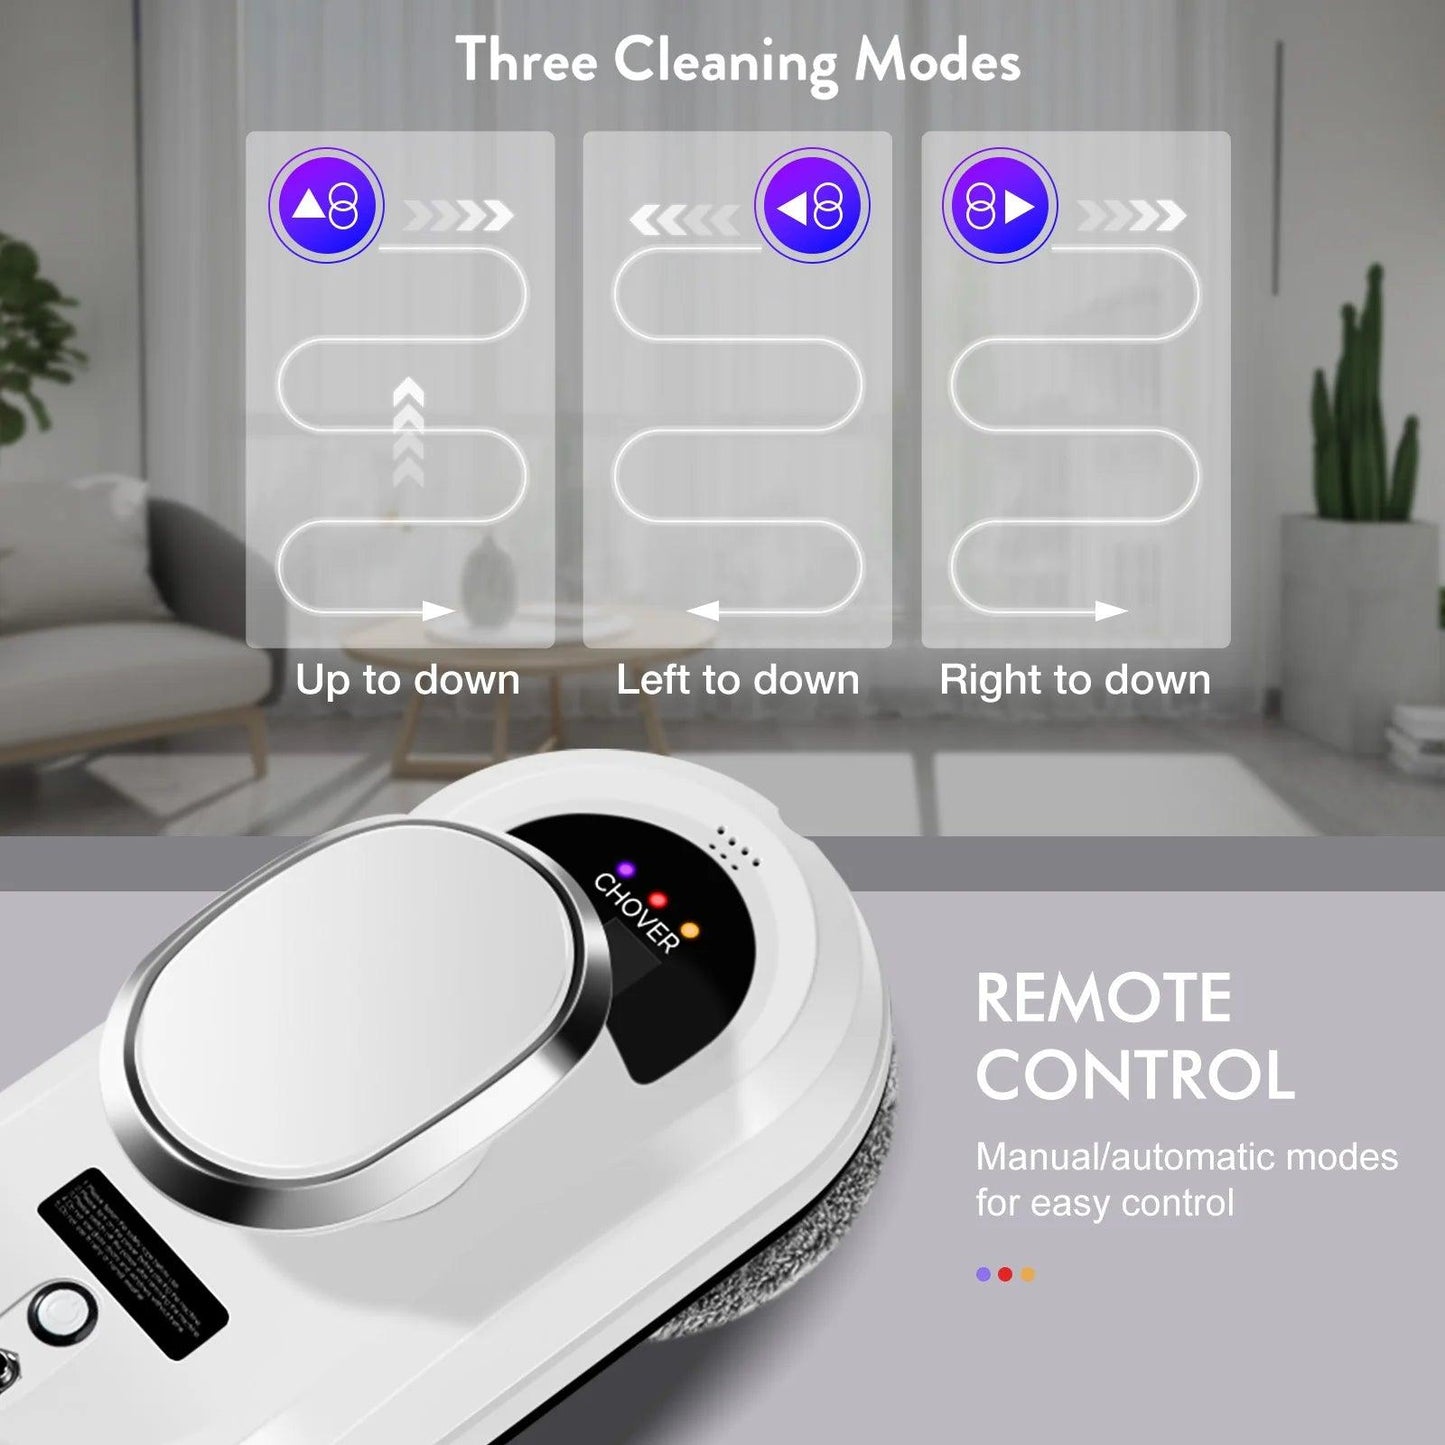 CHOVERY Robot vacuum cleaner window cleaning robot Diversi Shop™